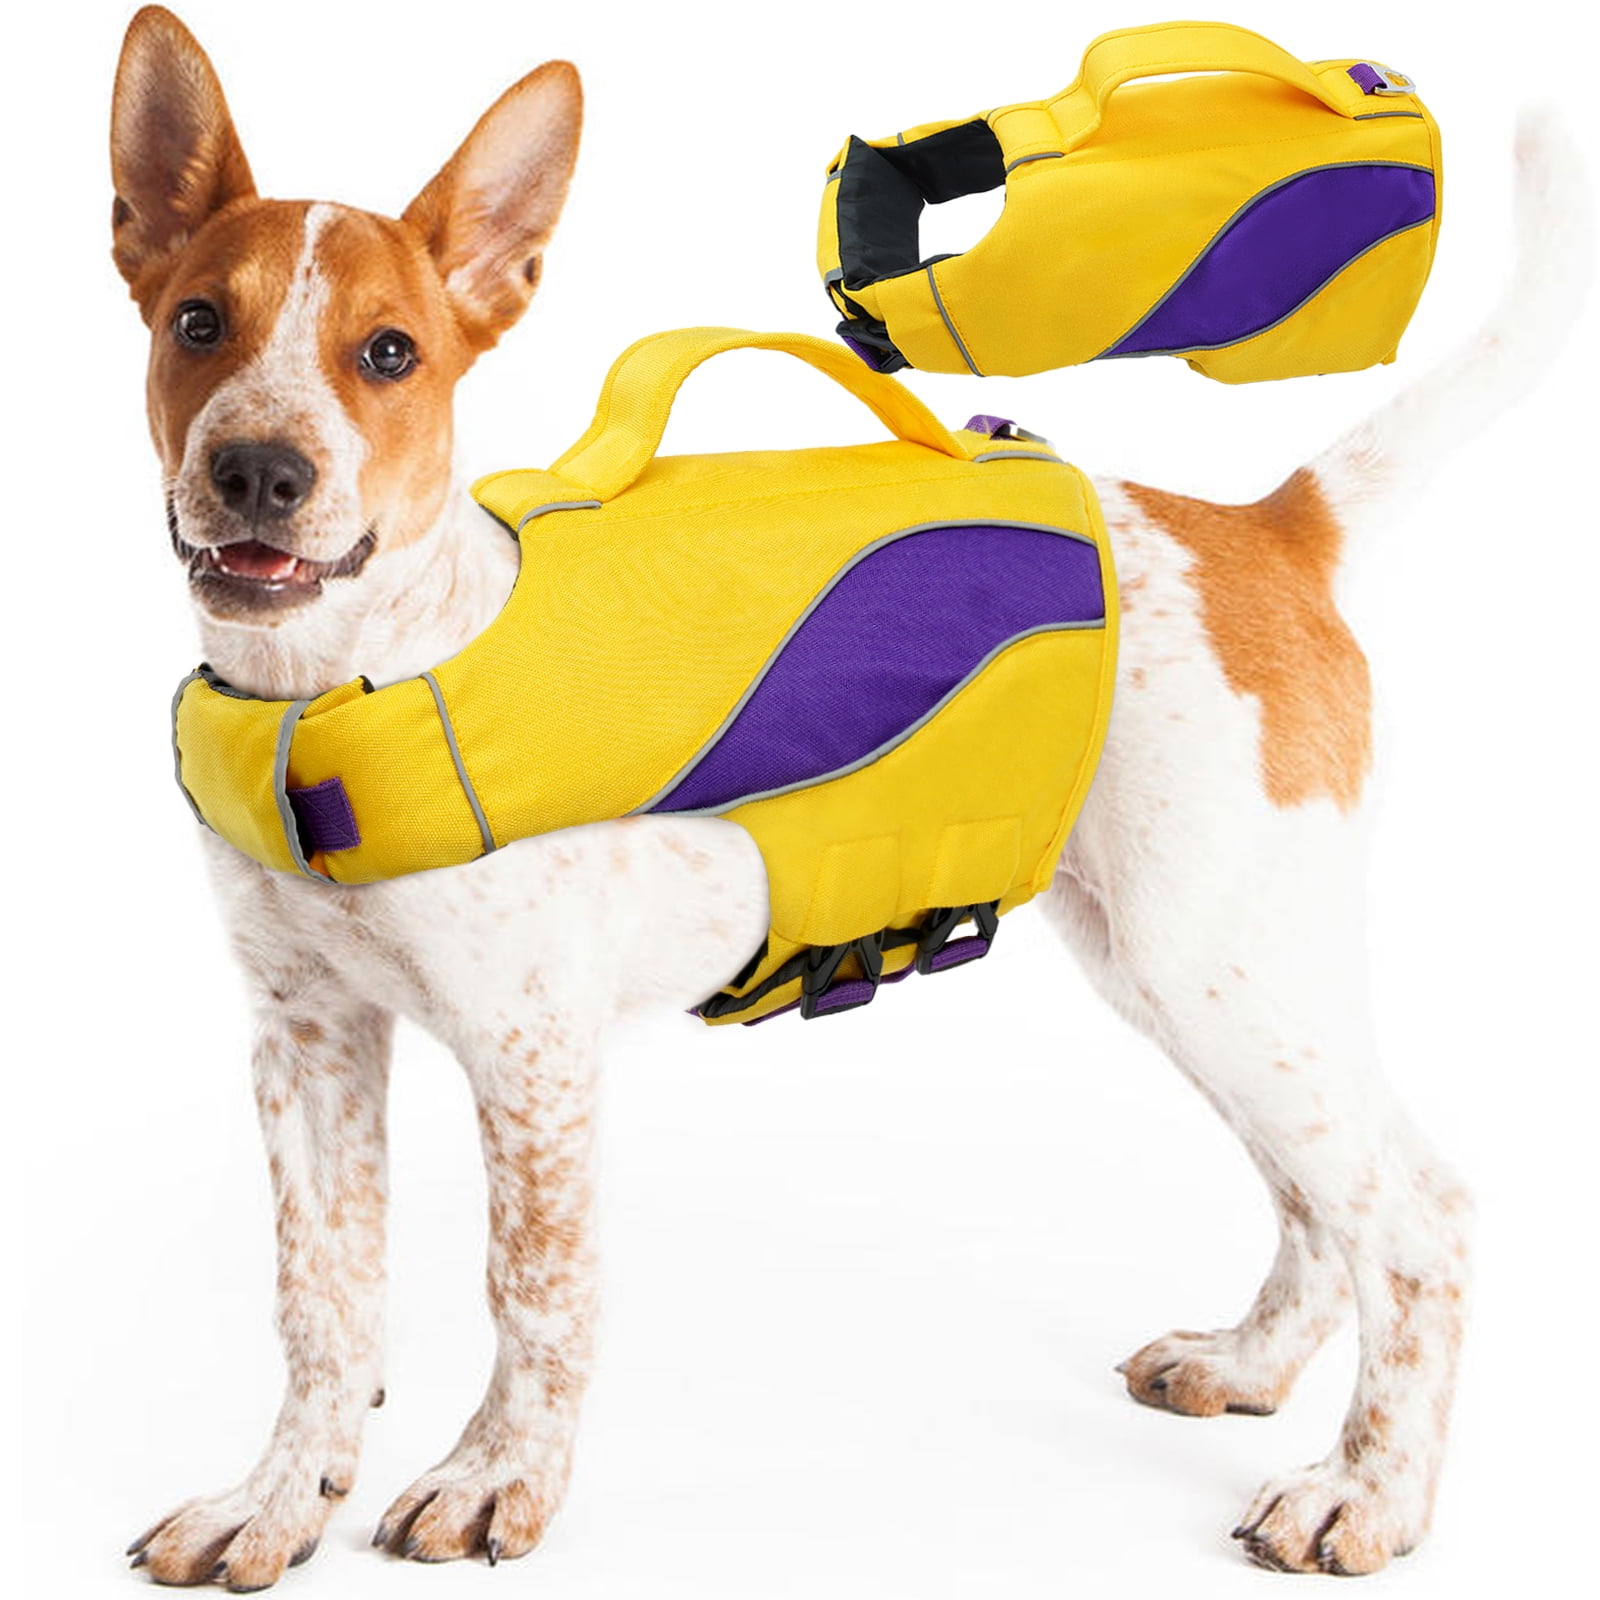 Adjustable Dog Life Jackets for Small Dogs with Enhanced Buoyancy Small Dog Swim Vest with Durable Rescue Handle EMUST Dog Life Vests Blue,XS 